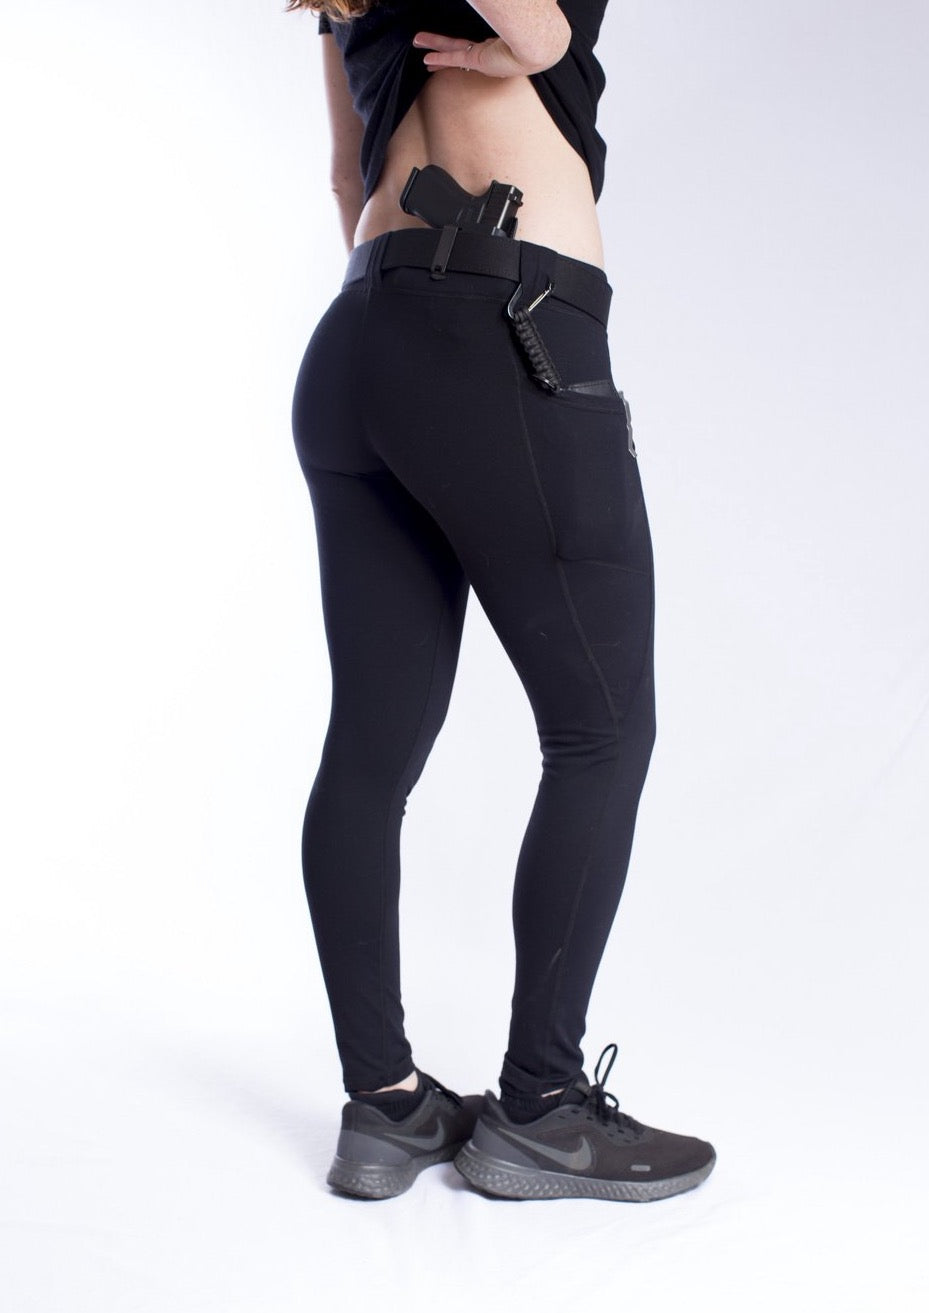 Concealed Carry Leggings | The Defender Tactical Leggings | Concealed Carry  Clothing for Women